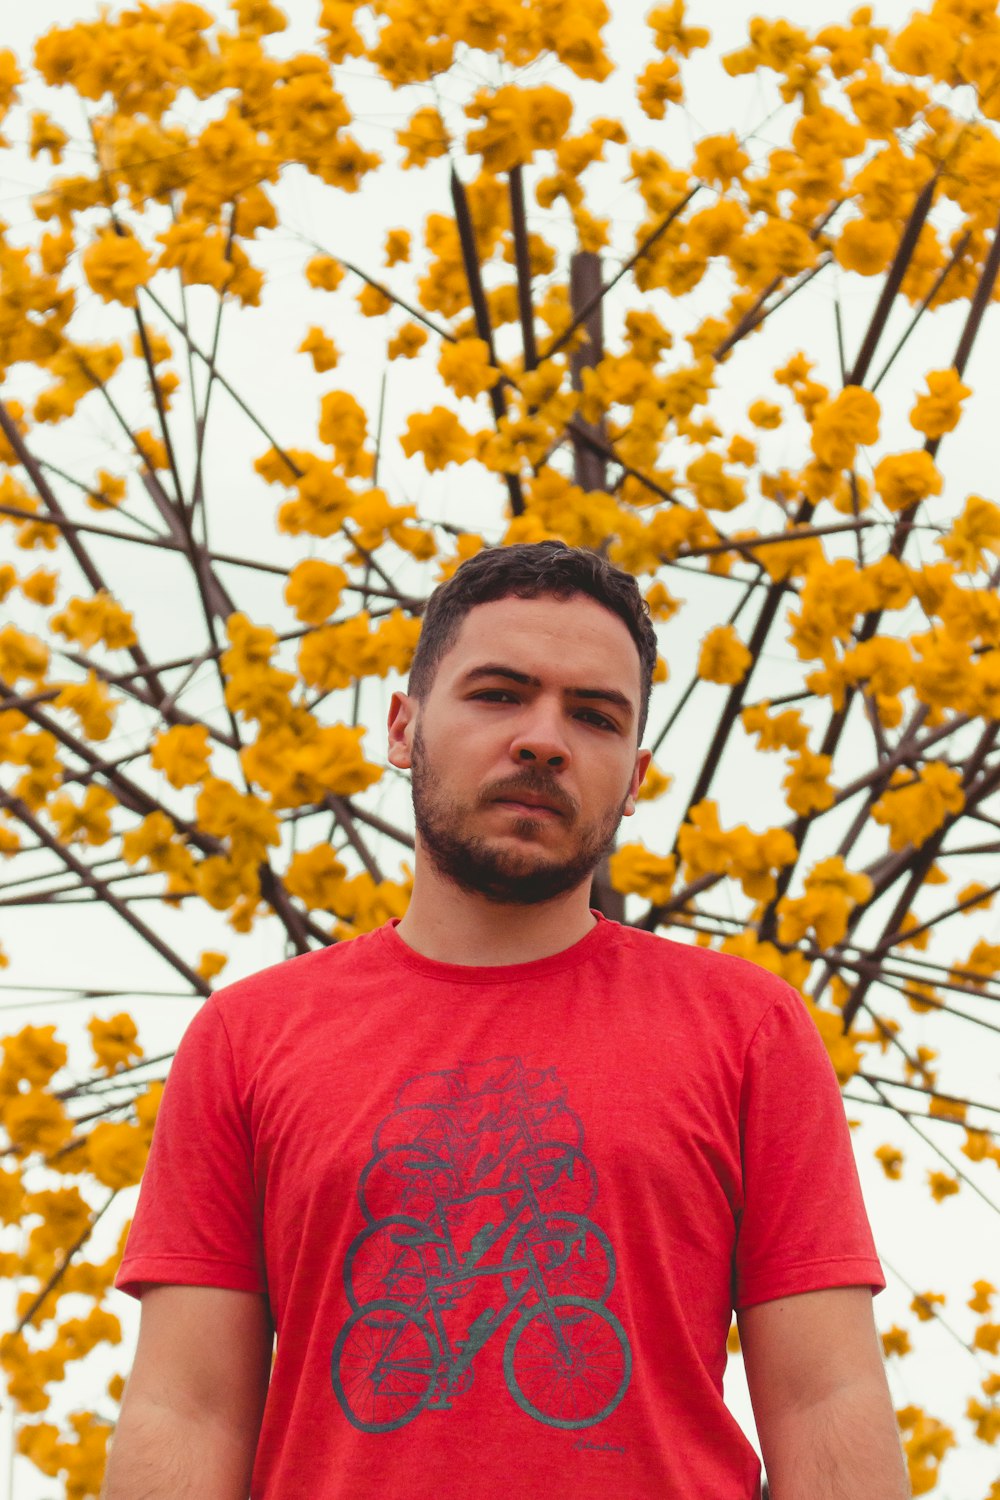 man in red crew neck shirt standing near yellow flowers